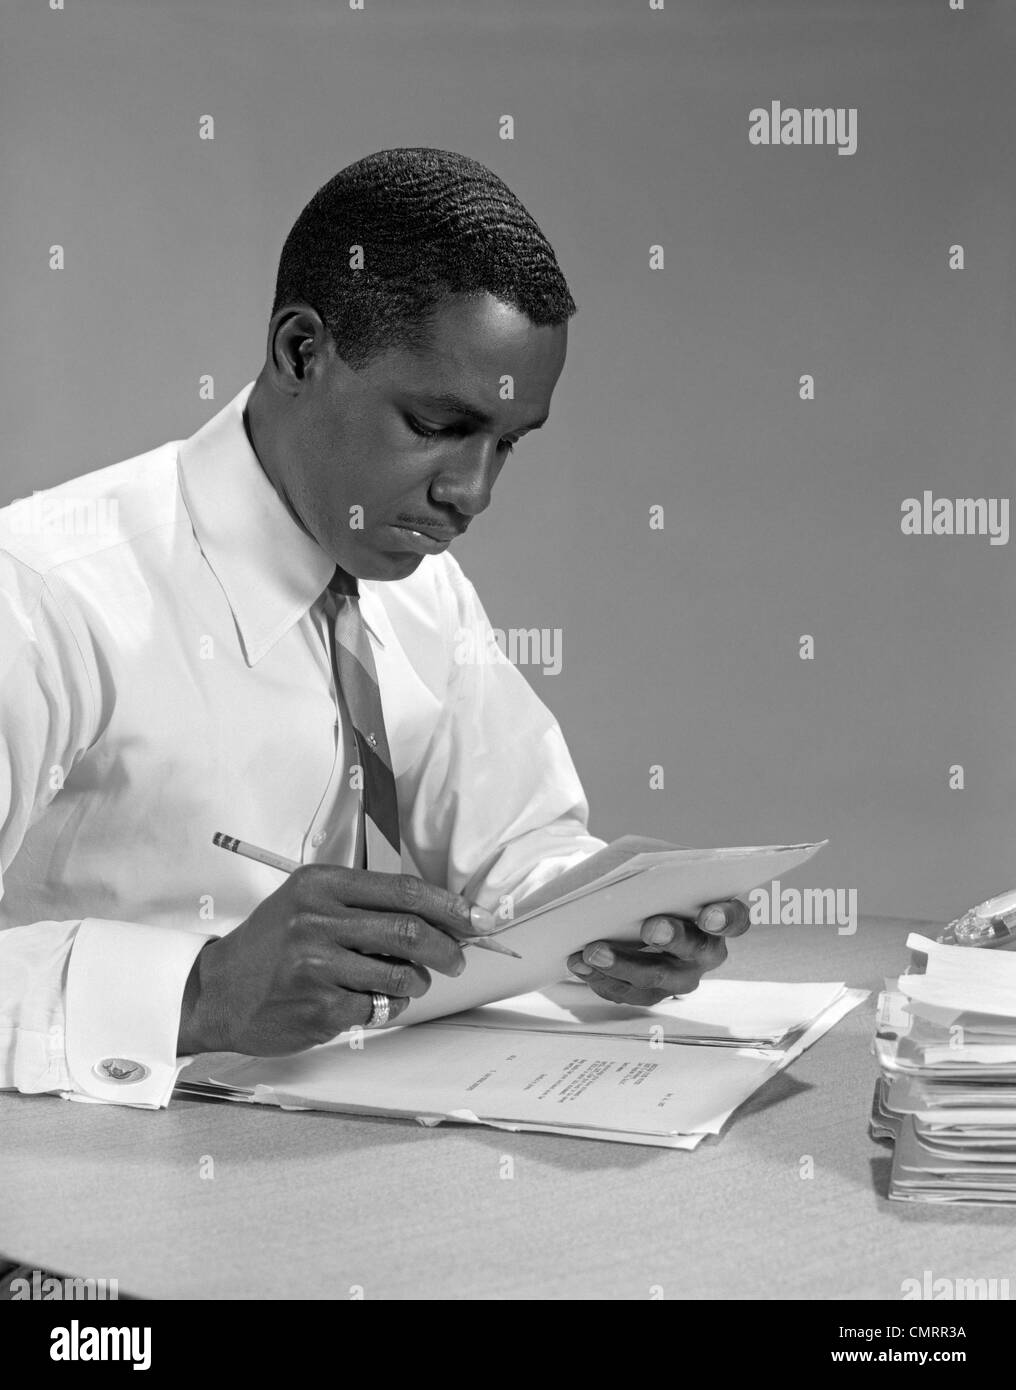 1960s AFRICAN AMERICAN MAN BUSINESSMAN WORKING DESK FILES PAPERS Stock Photo